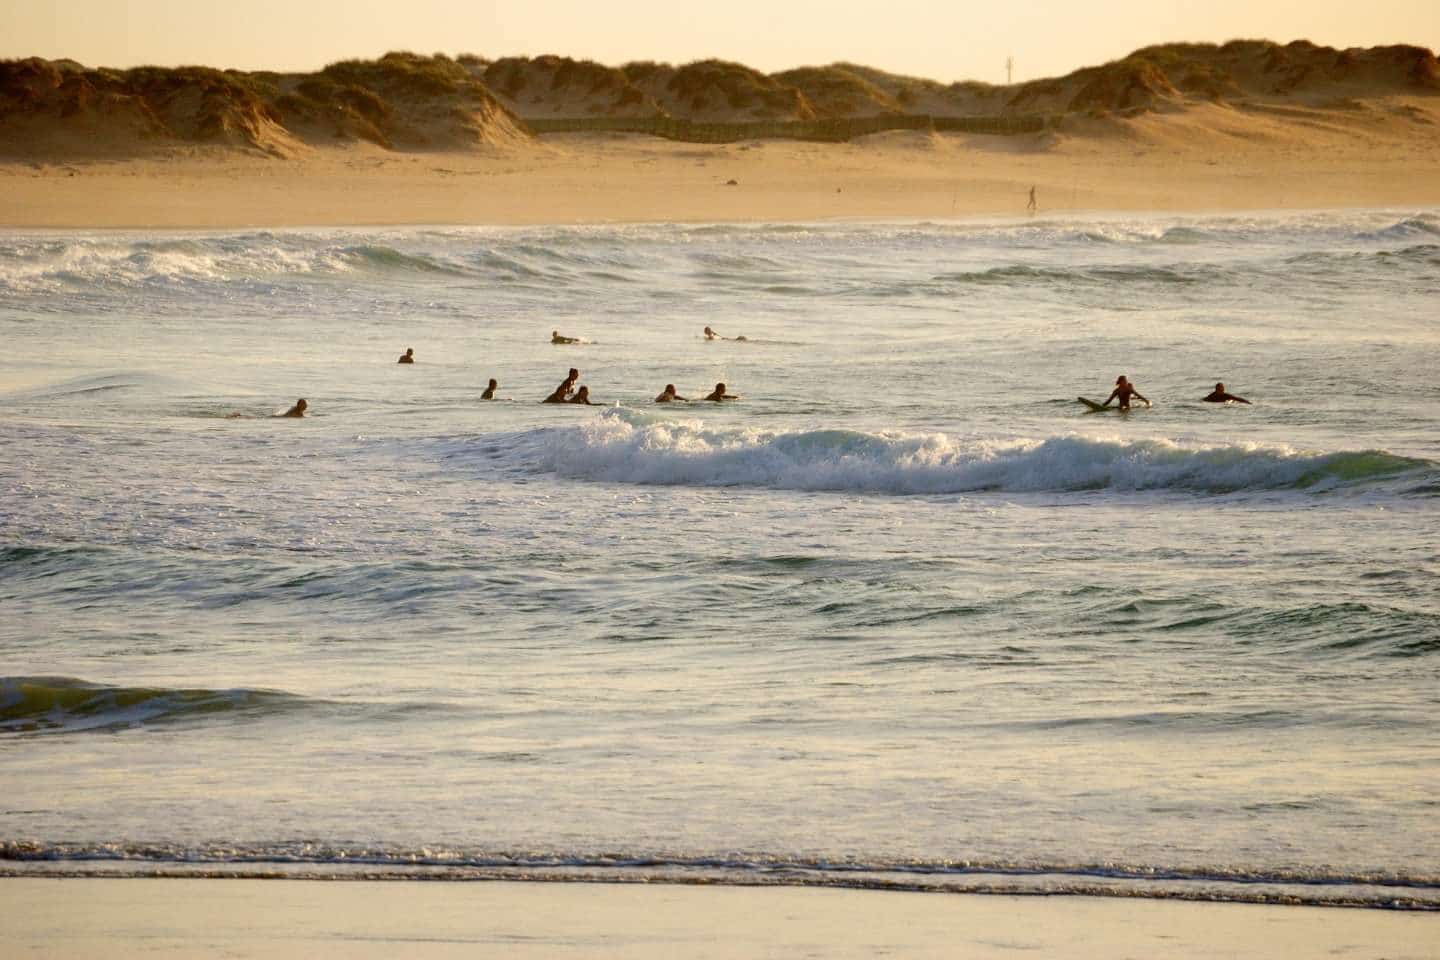 A group of people surfing in Peniche Centro Region